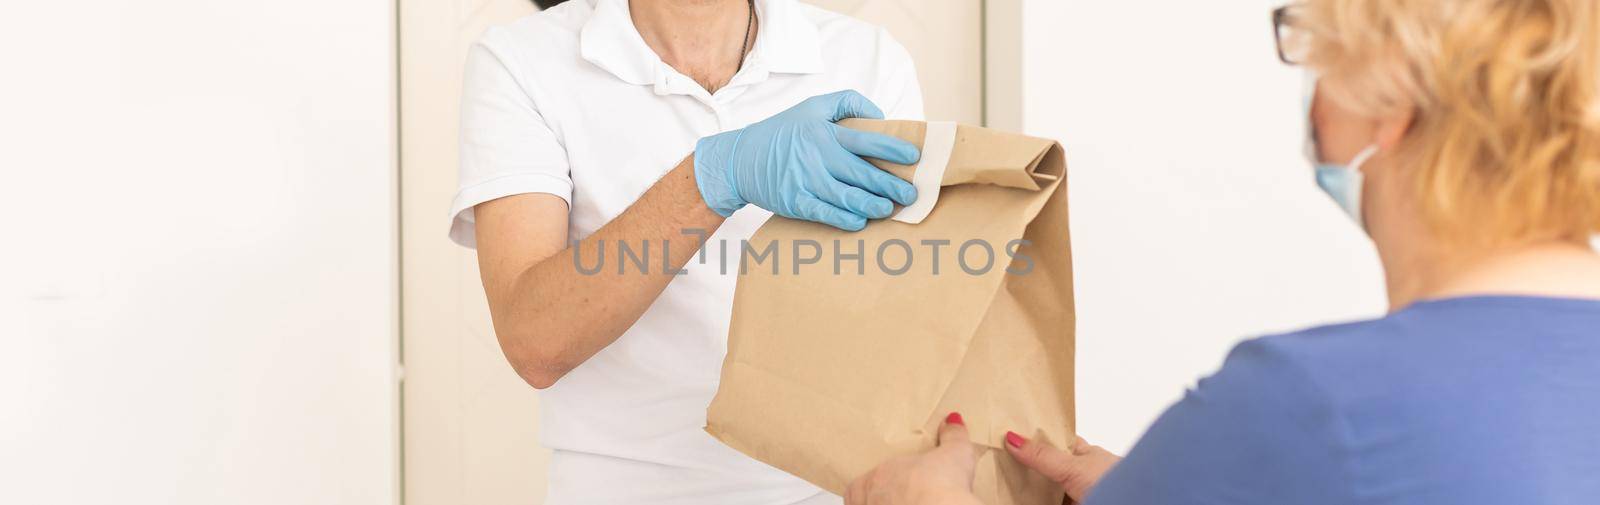 Food delivery to an elderly woman during quarantine Coronavirus Covid-19 epidemic by Andelov13